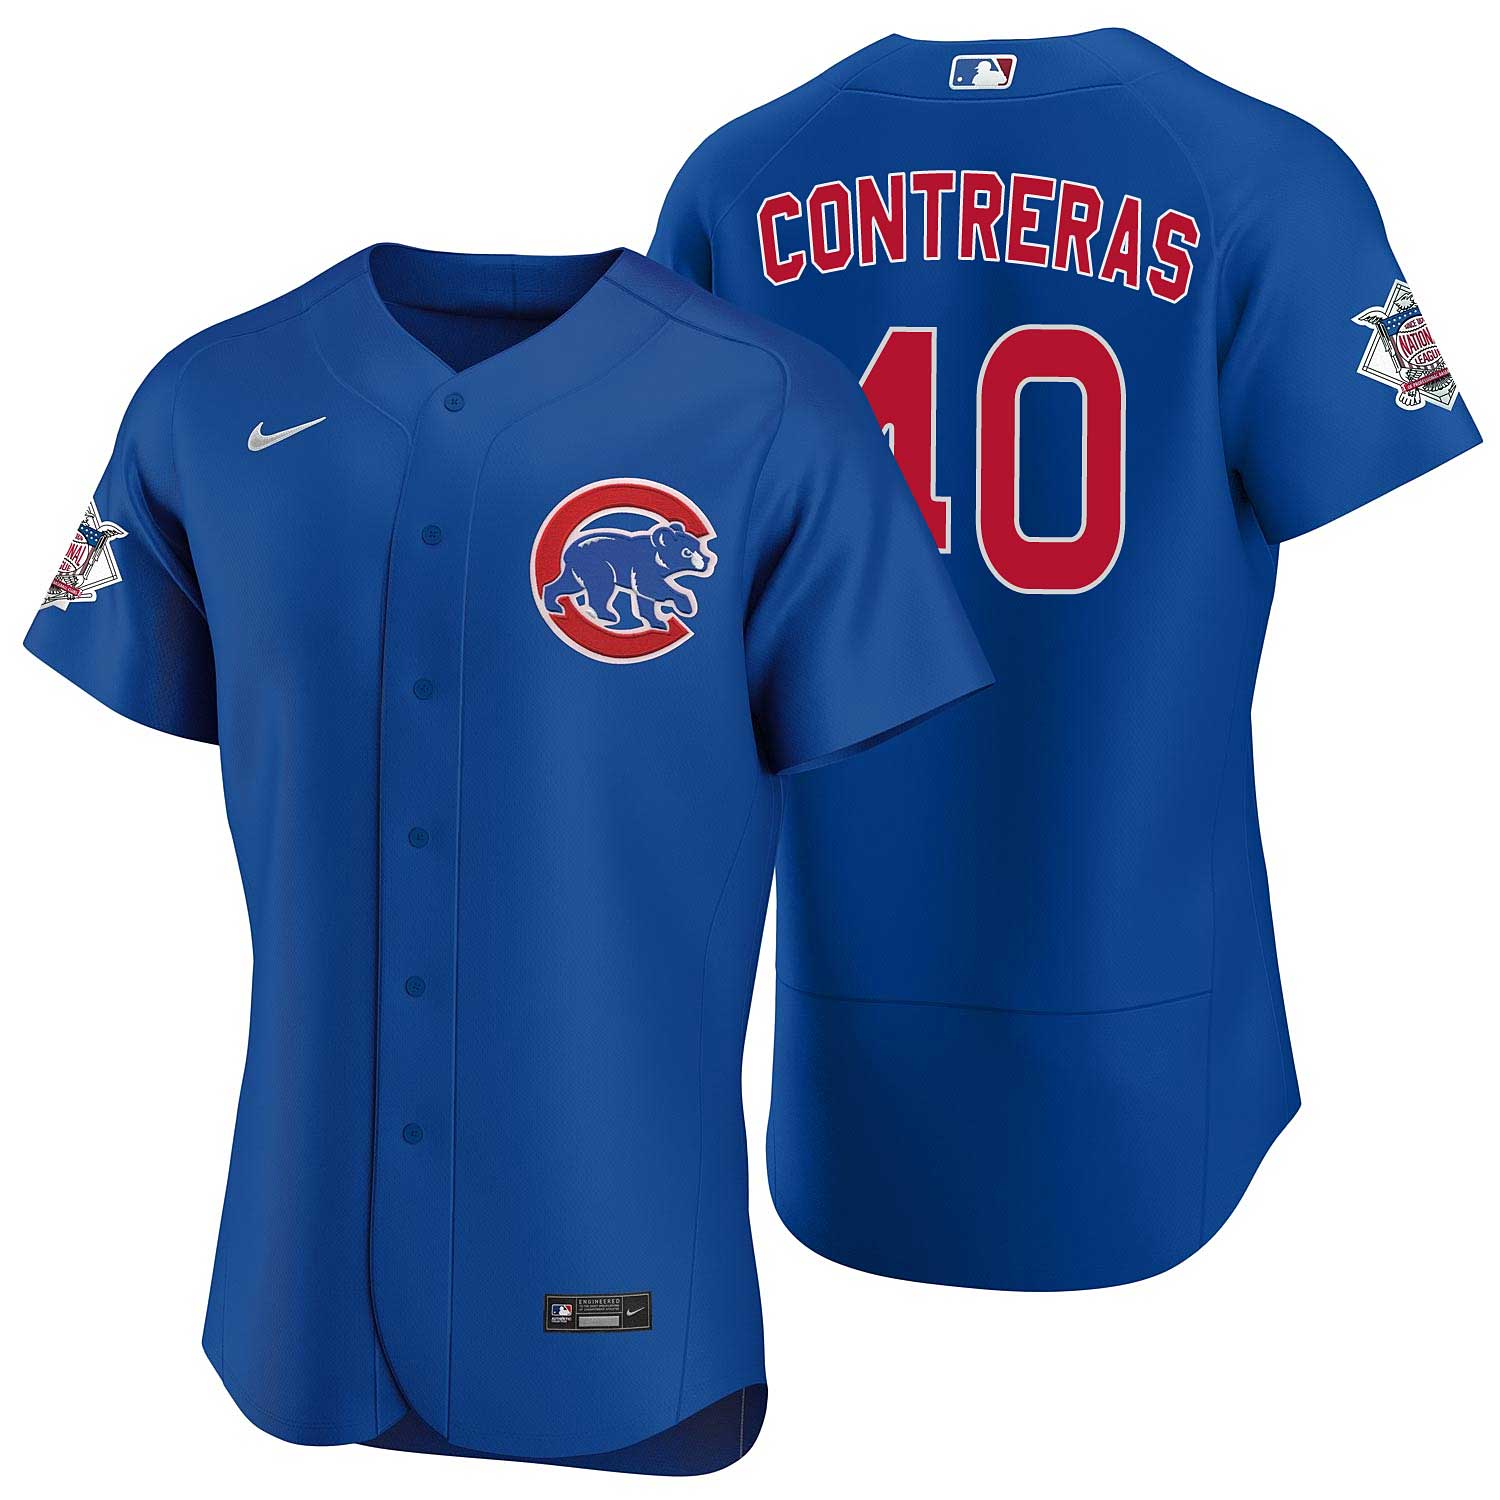 Chicago Cubs Willson Contreras Nike Home Authentic Jersey 44 = Medium / Large